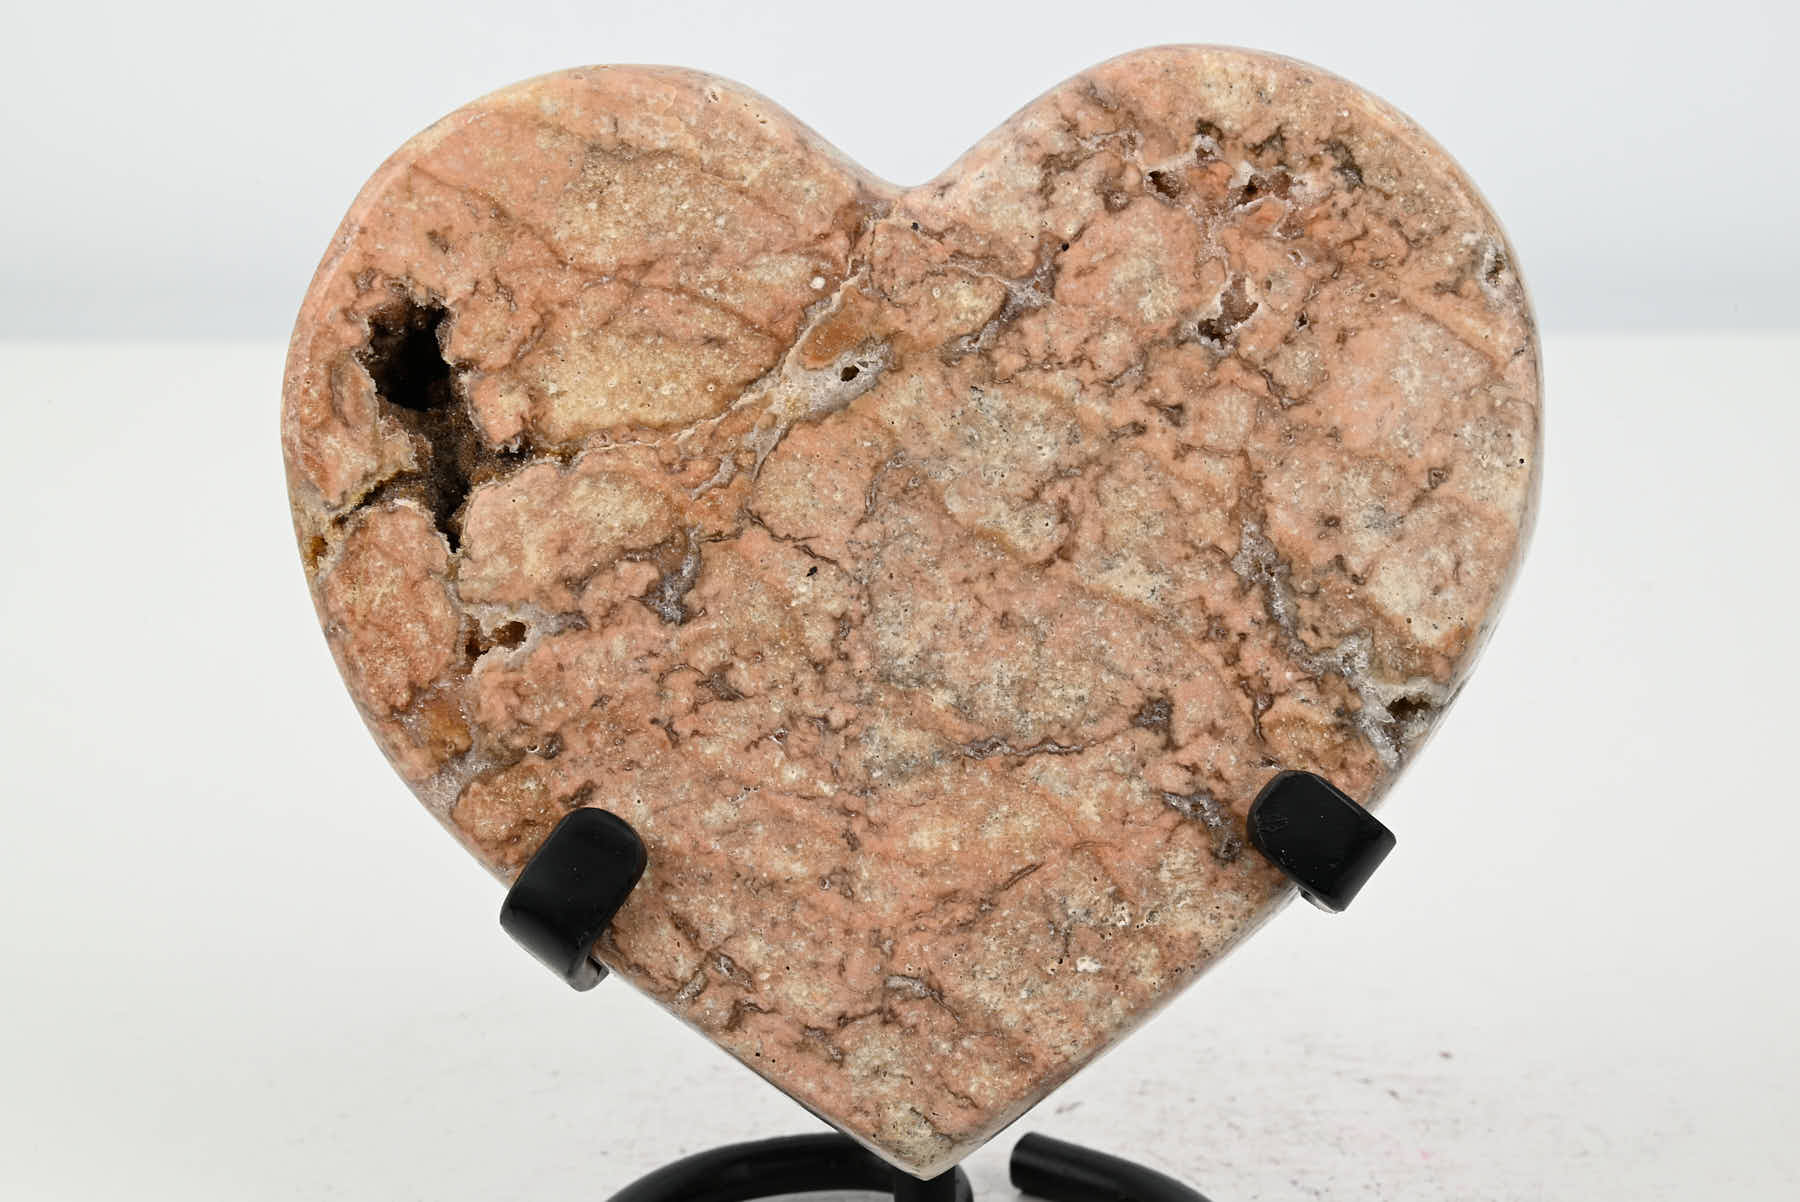 Extra Quality Pink Amethyst Heart - 0.67kg, 14cm high - #HTPINK-34017